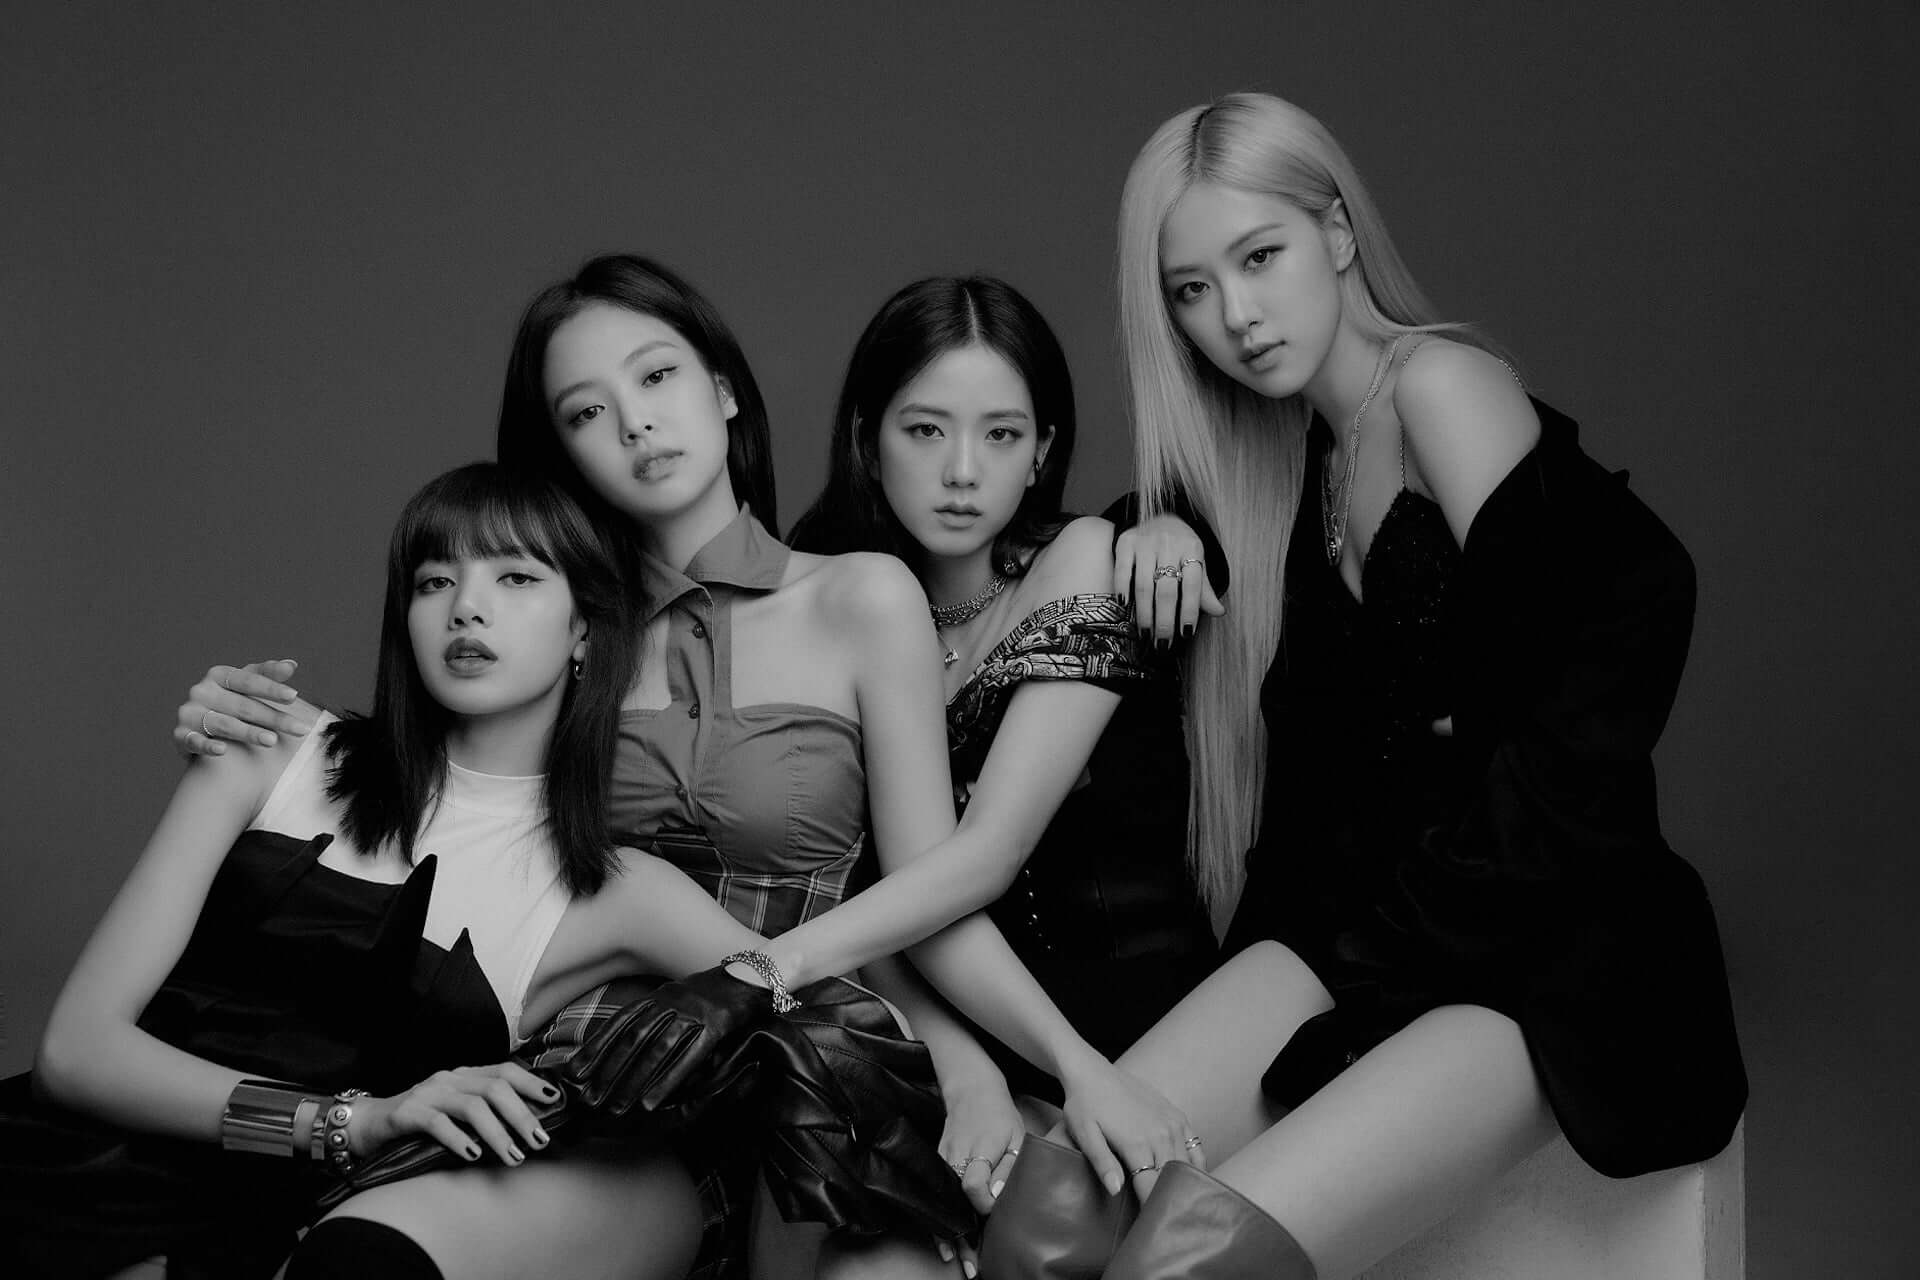 YG Entertainment has announced BLACKPINK members' upcoming solo projects